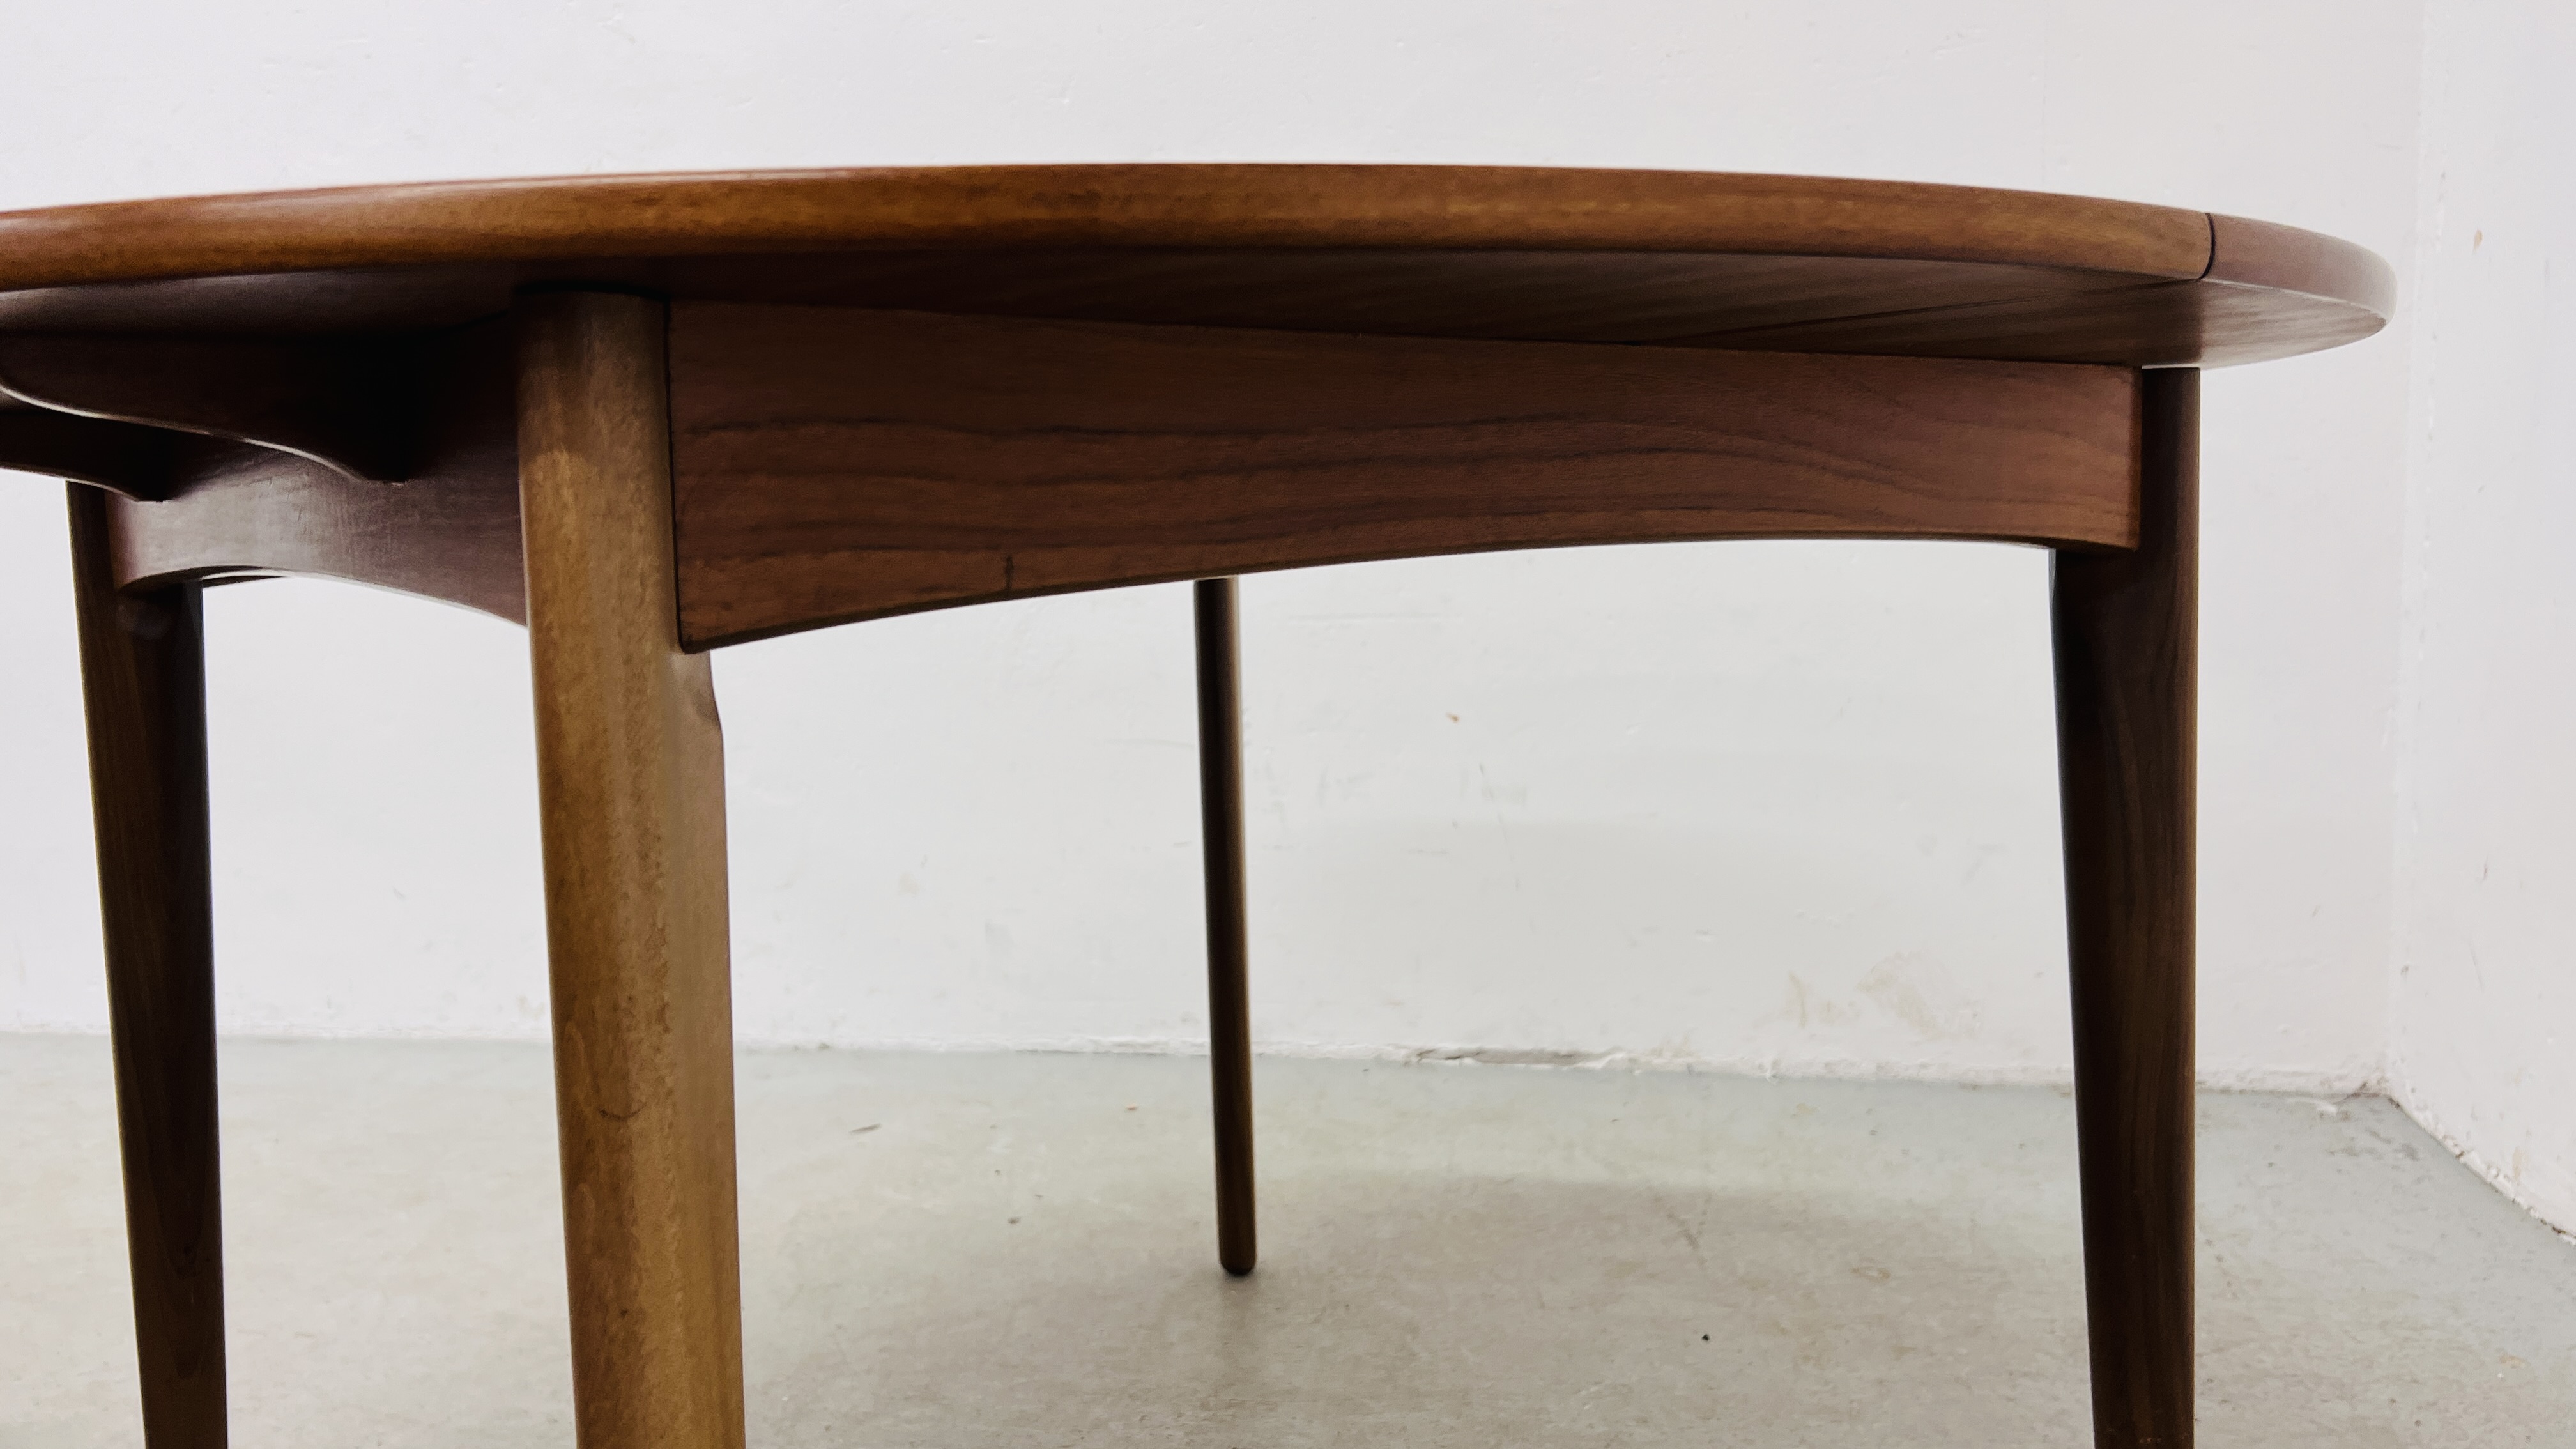 DANISH MID-CENTURY TEAK EXTENDING CIRCULAR DINING TABLE (2 LEAVES) ALONG WITH A SET OF SIX DANISH - Image 14 of 23